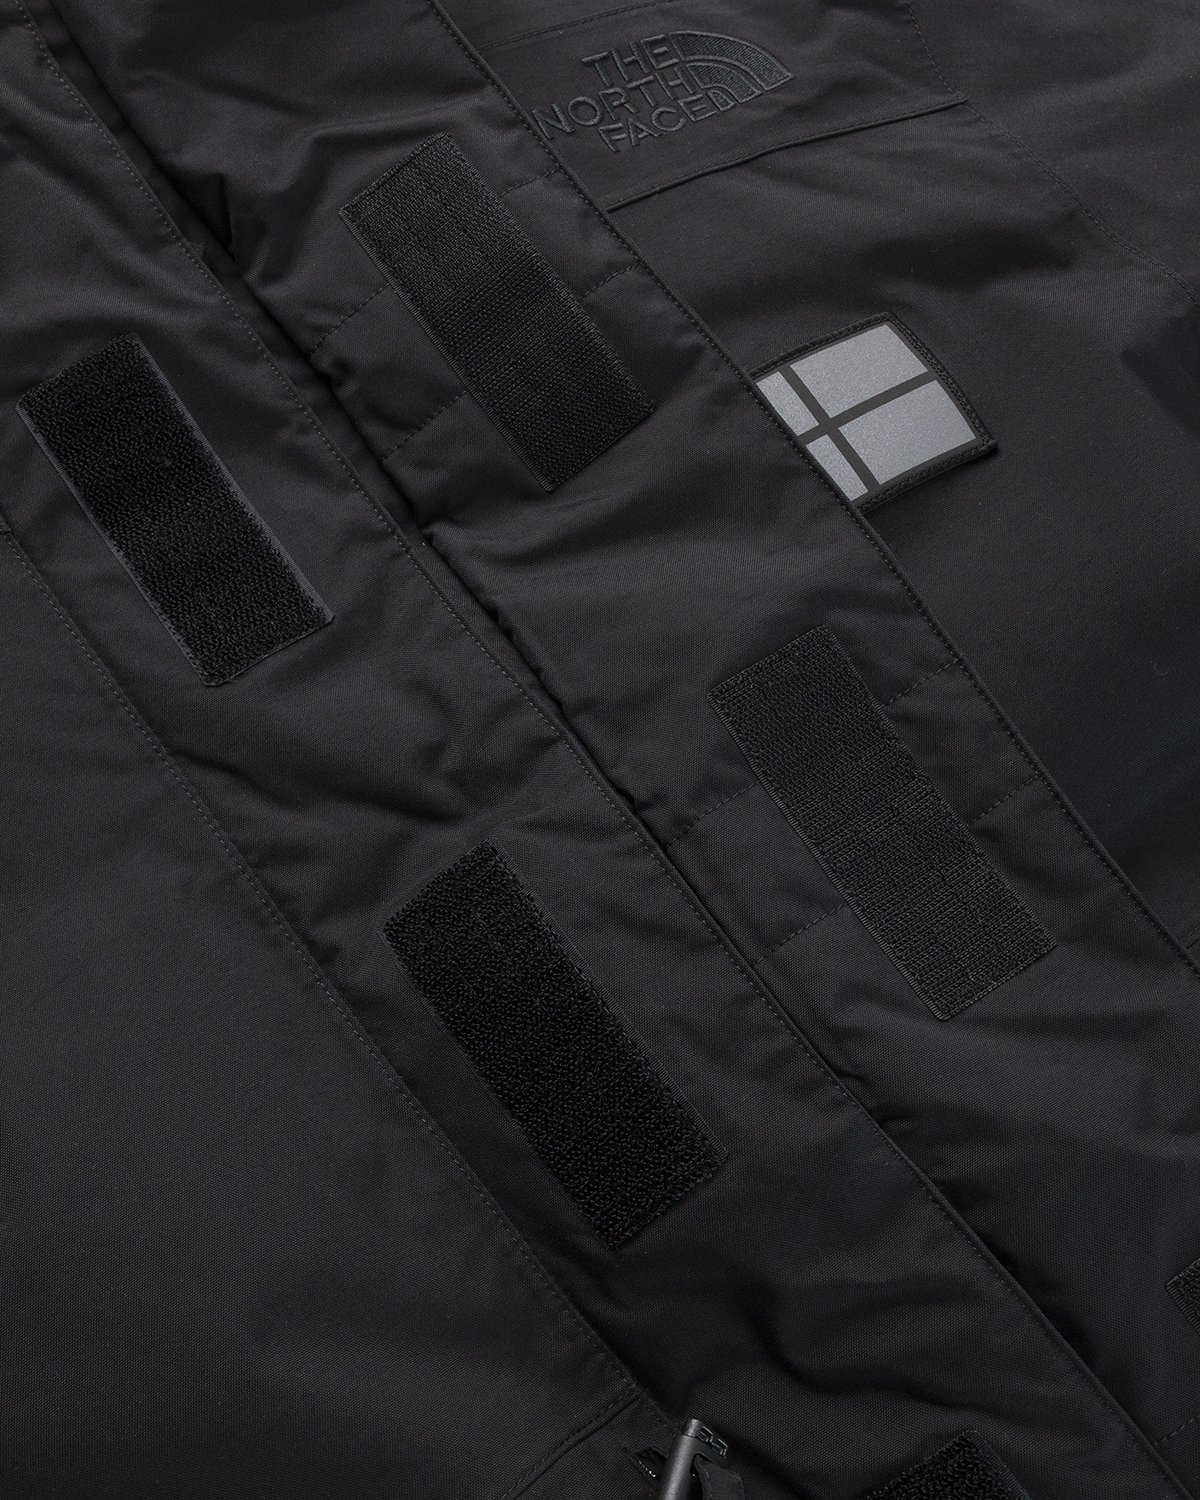 The North Face - Trans Antarctica Expedition Parka Black - Clothing - Black - Image 4